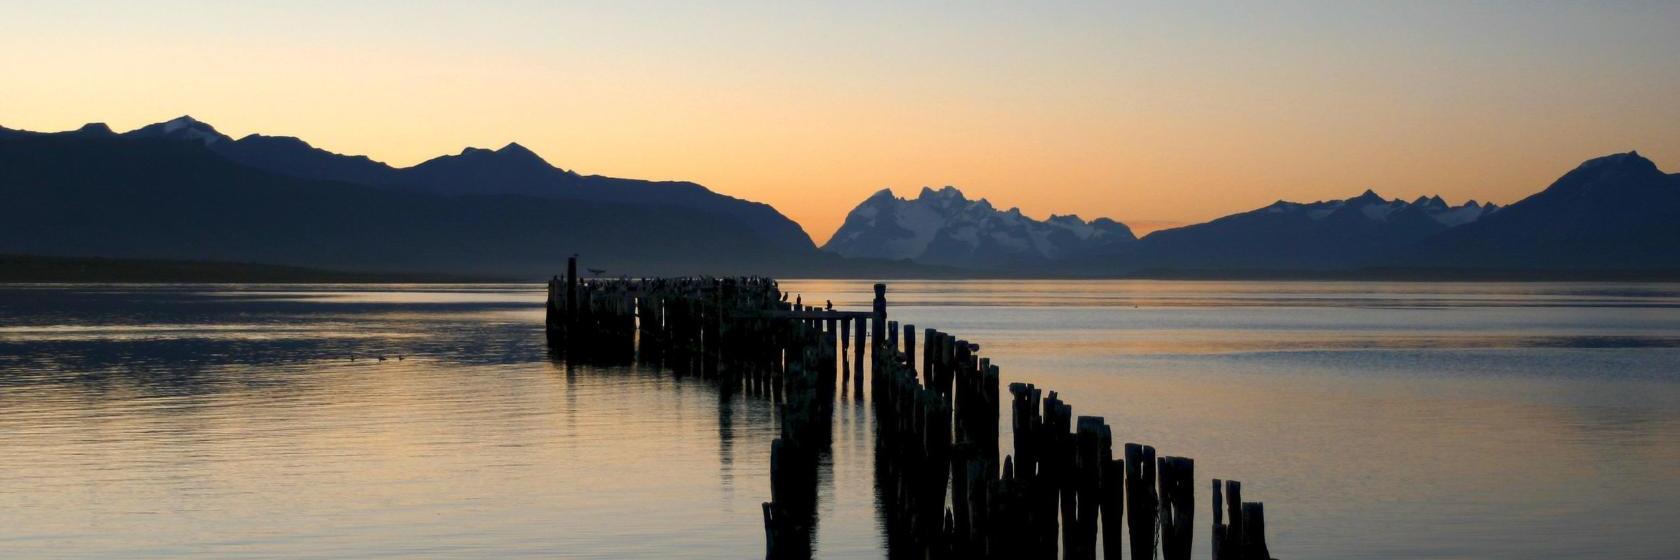 10 Best Puerto Natales Hotels, Chile (From $29)